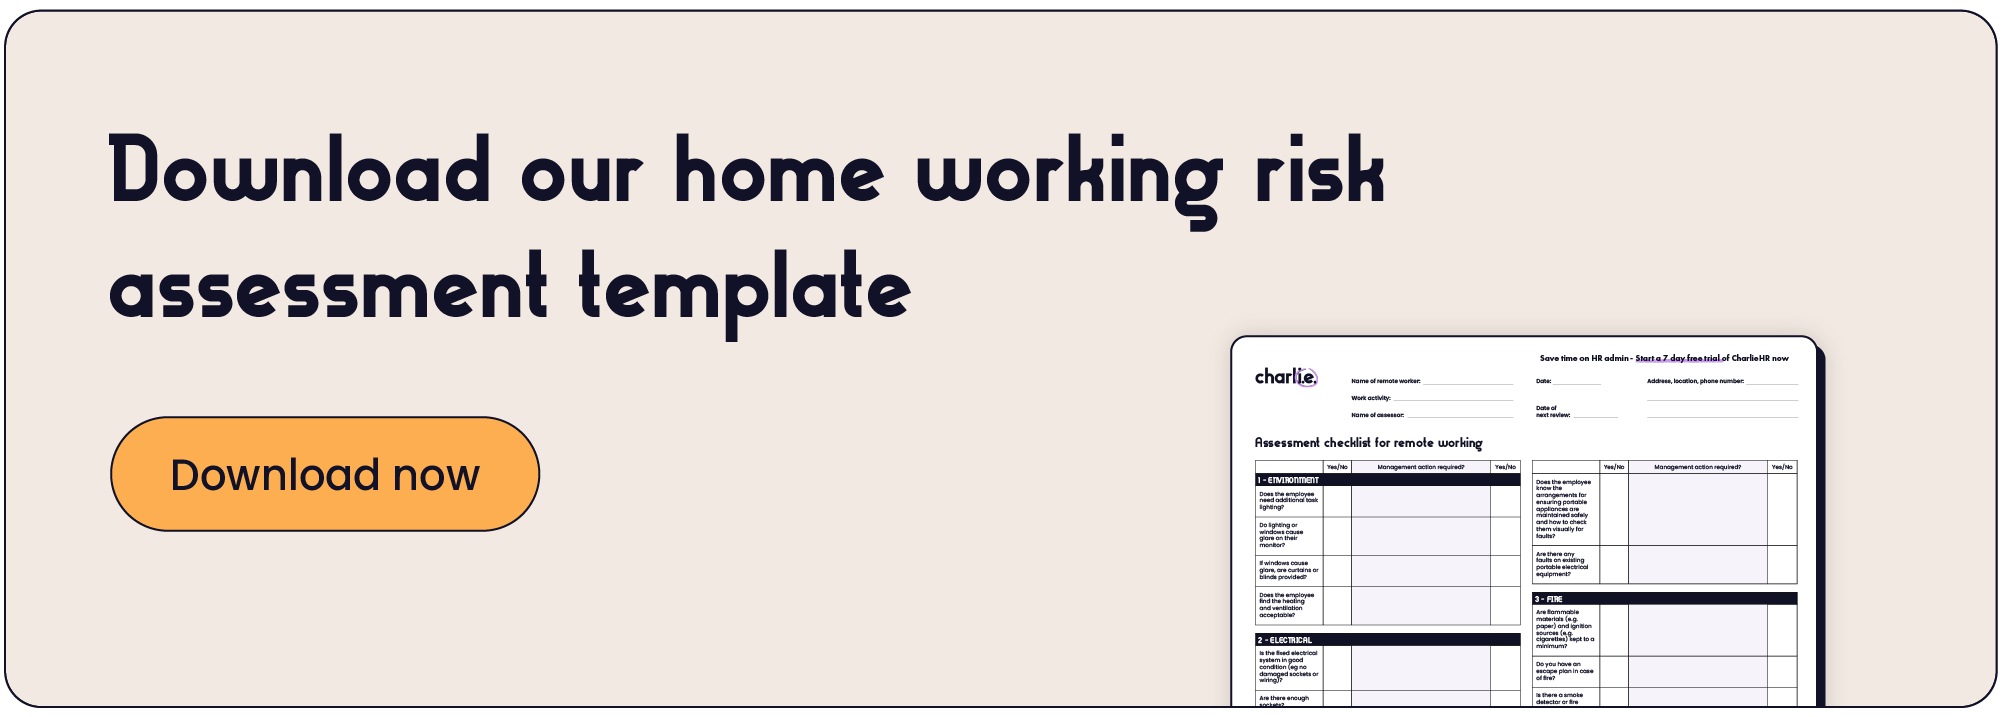 Download our home working risk assessment template.webp